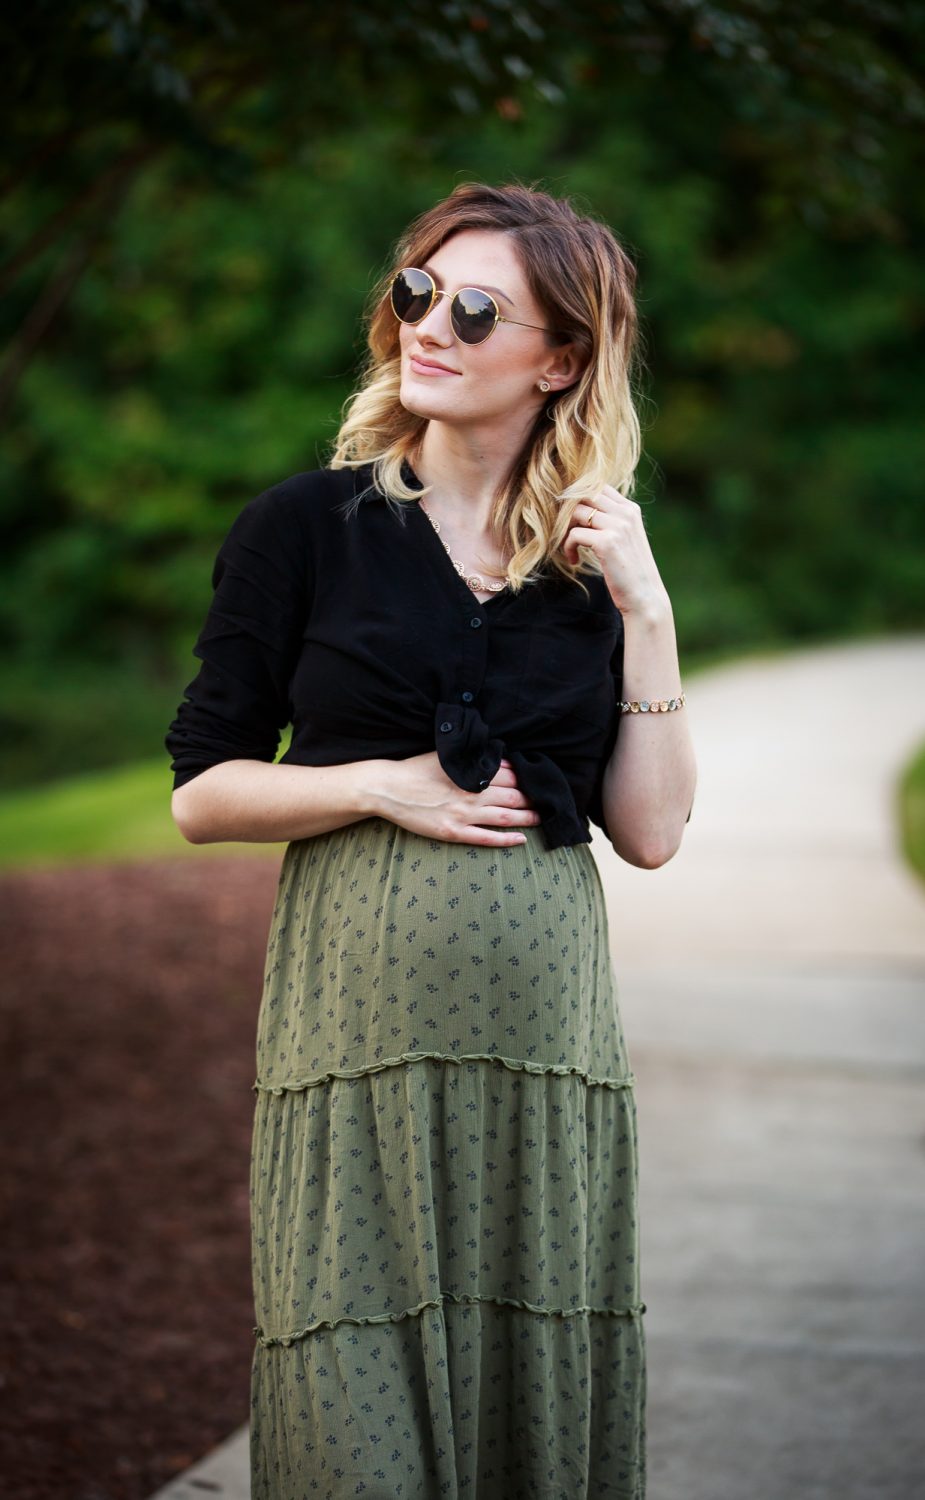 High-Waisted Maternity Style - Styling A Non-Maternity Maxi Skirt